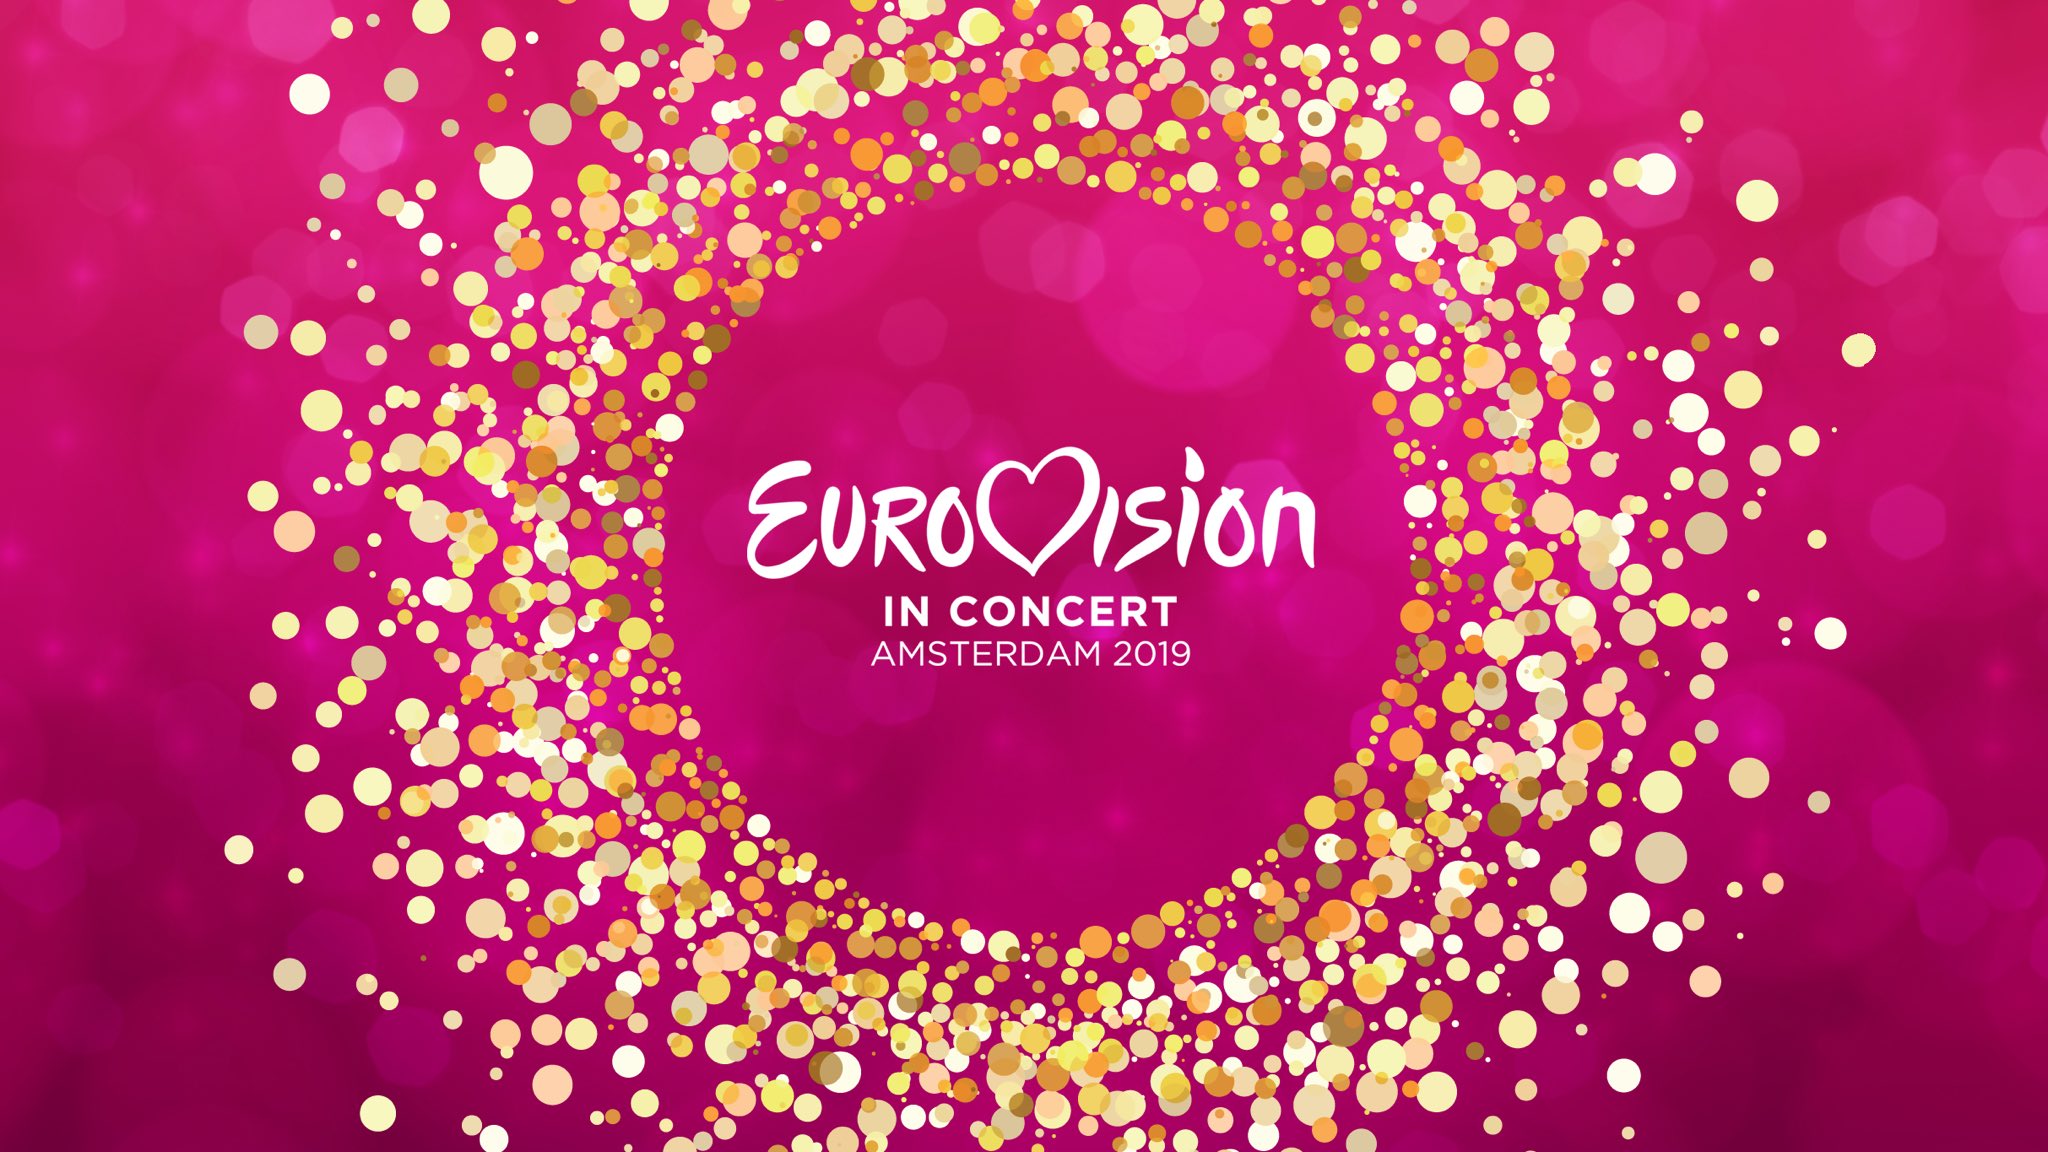 Eurovision in Concert: Belgium’s Eliot is the first 2019 artist to confirm